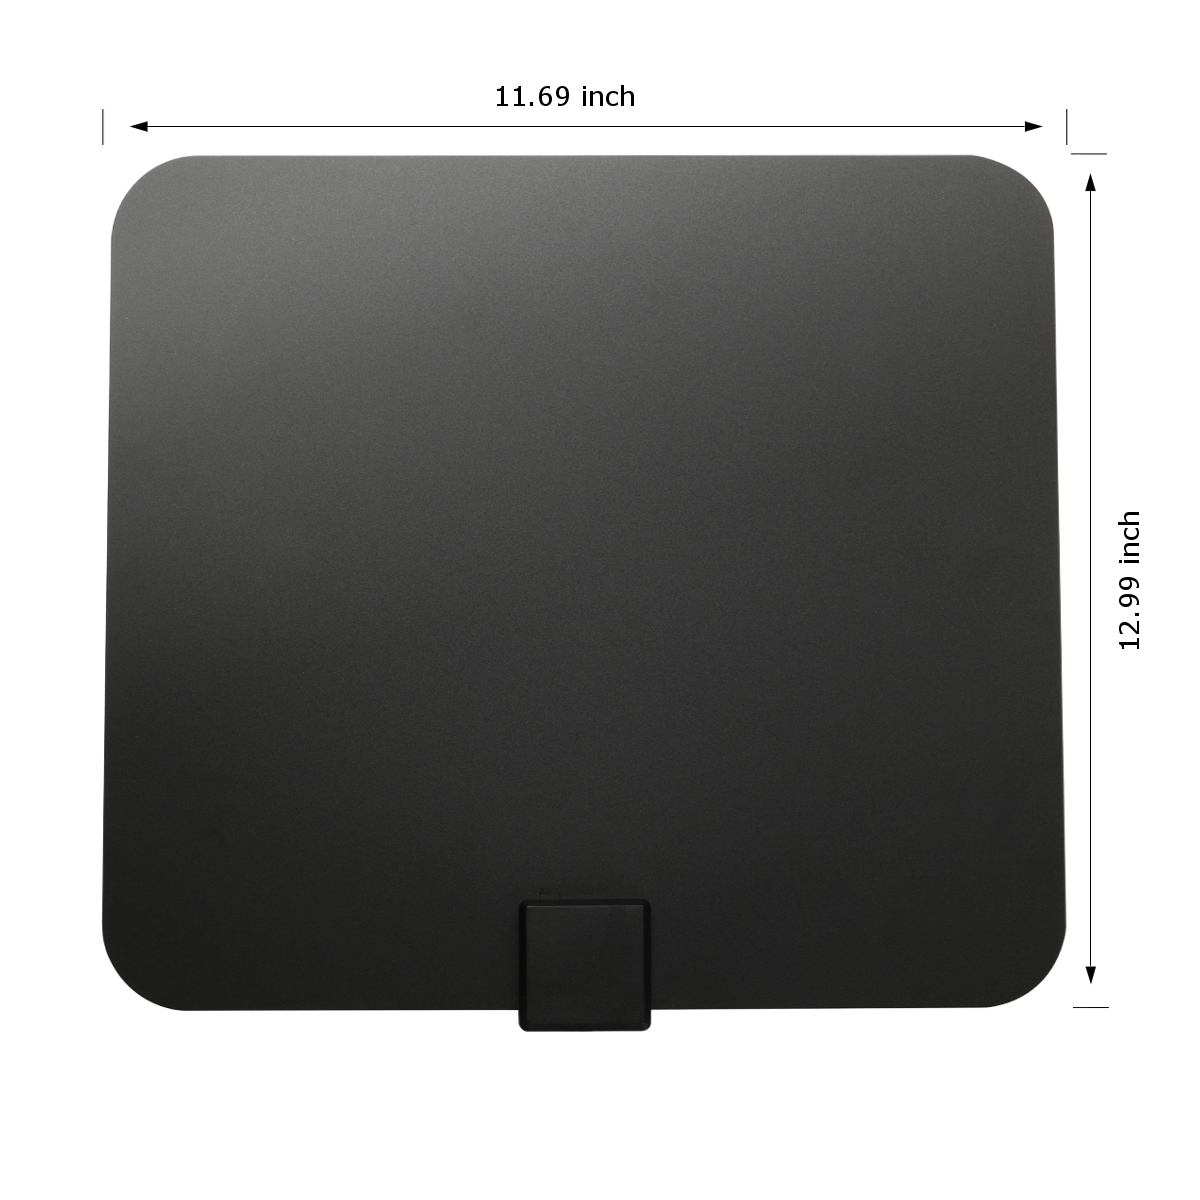 MECO-TV-Antenna-Indoor-TV-Antenna-Ultra-thin-Amplified-50-mile-digital-HDTV-antenna-with-amplifier-s-1974825-10